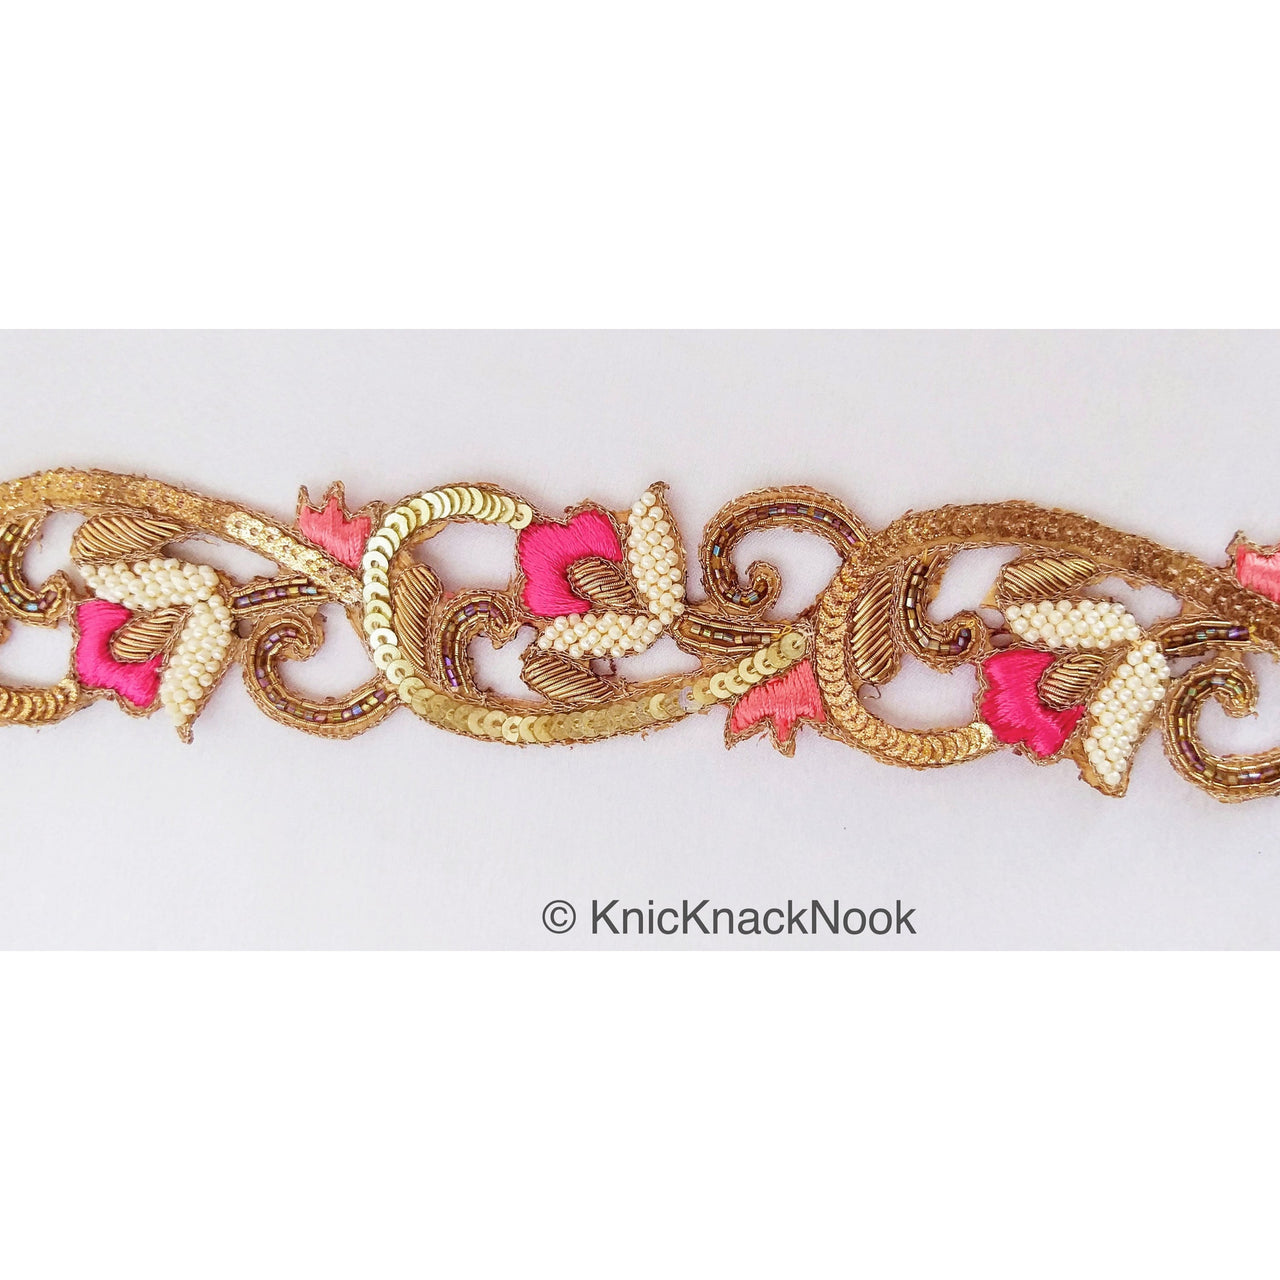 Hand Embroidered Lace Trim, Pink Floral Embroidery, Beaded In Off White Seed Beads & Bugle Beads